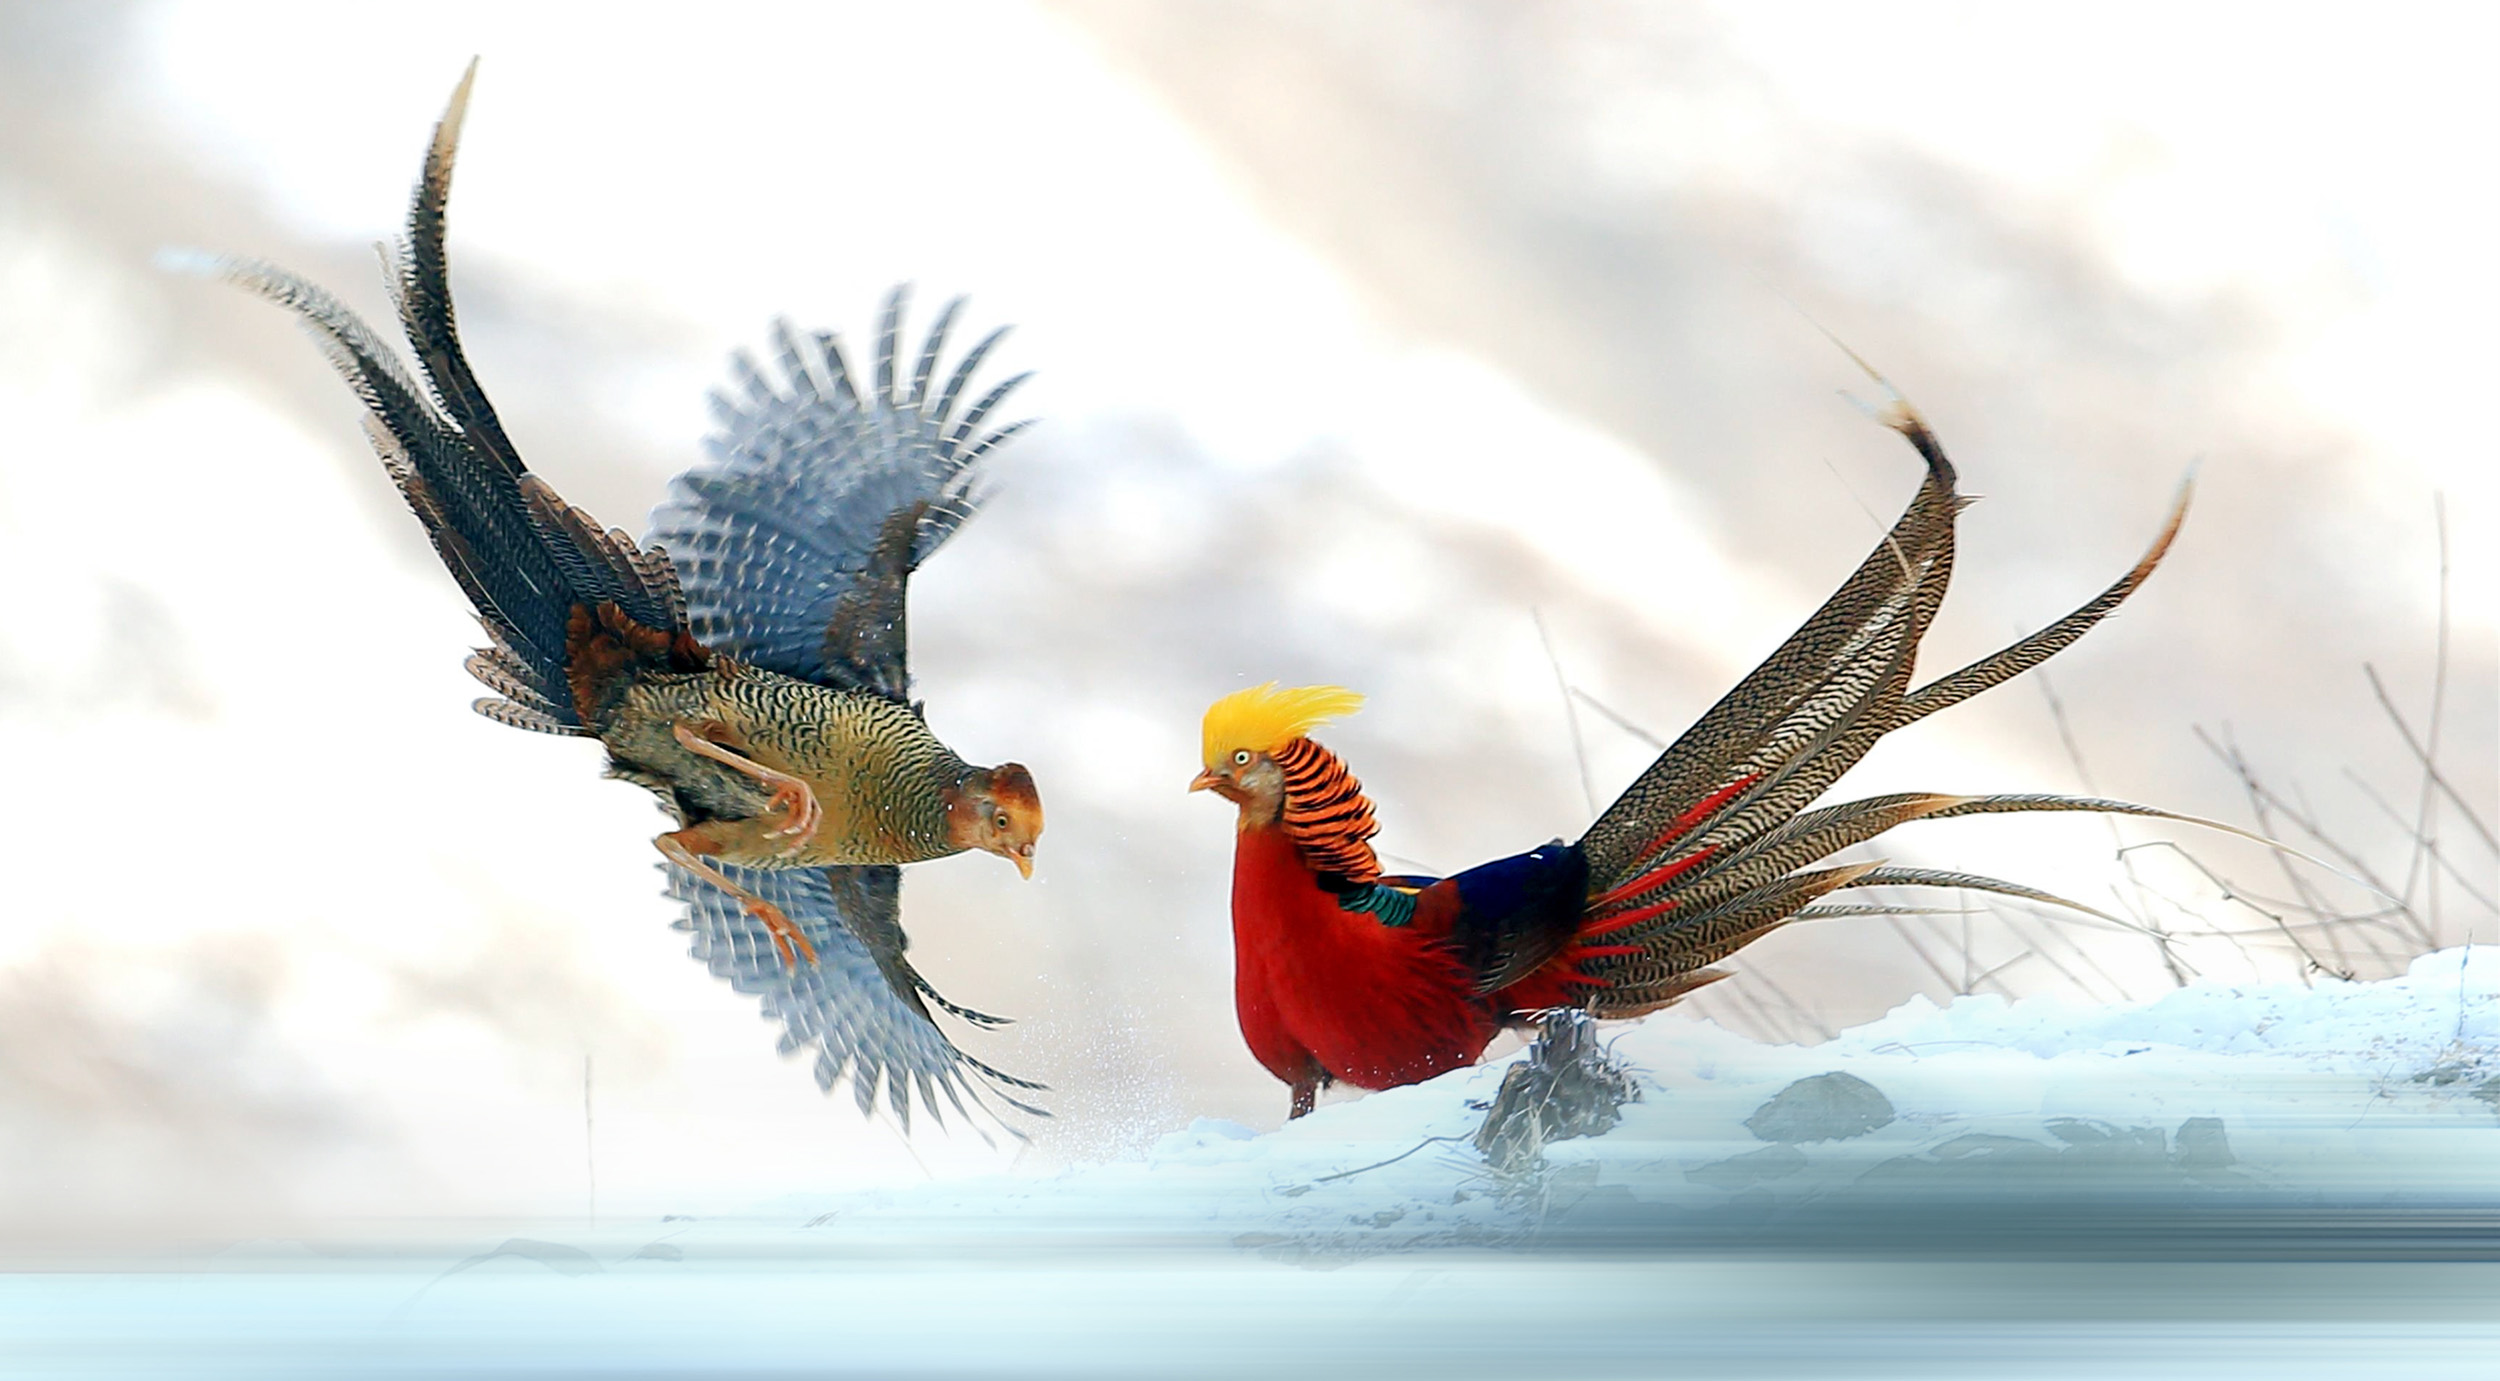 A male and female Golden Pheasant flapping their wings with a snow covered background.